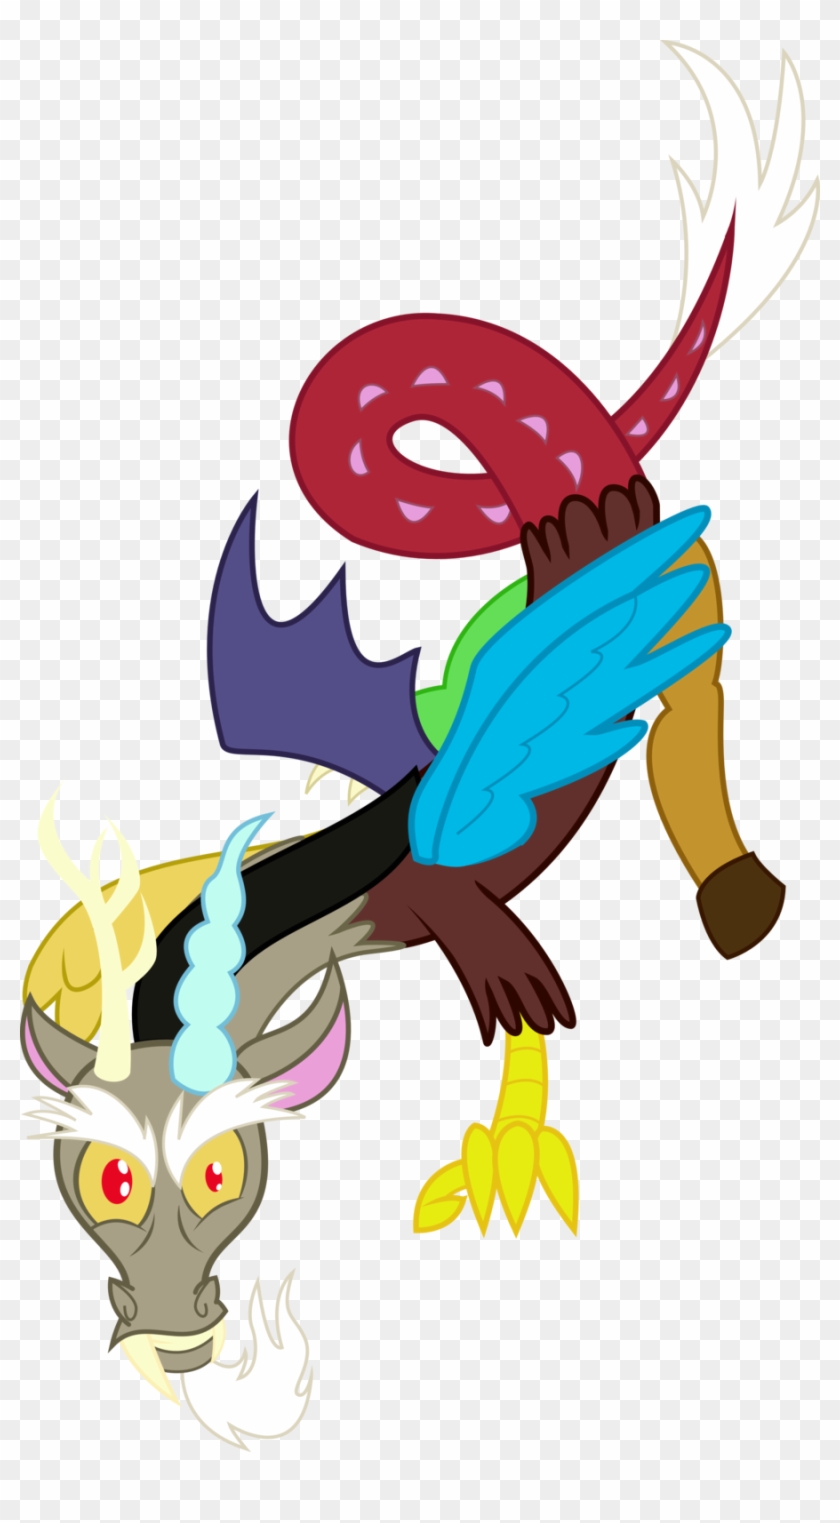 Discord The Draconequus By Theshadowstone Discord The - Discord #1239856